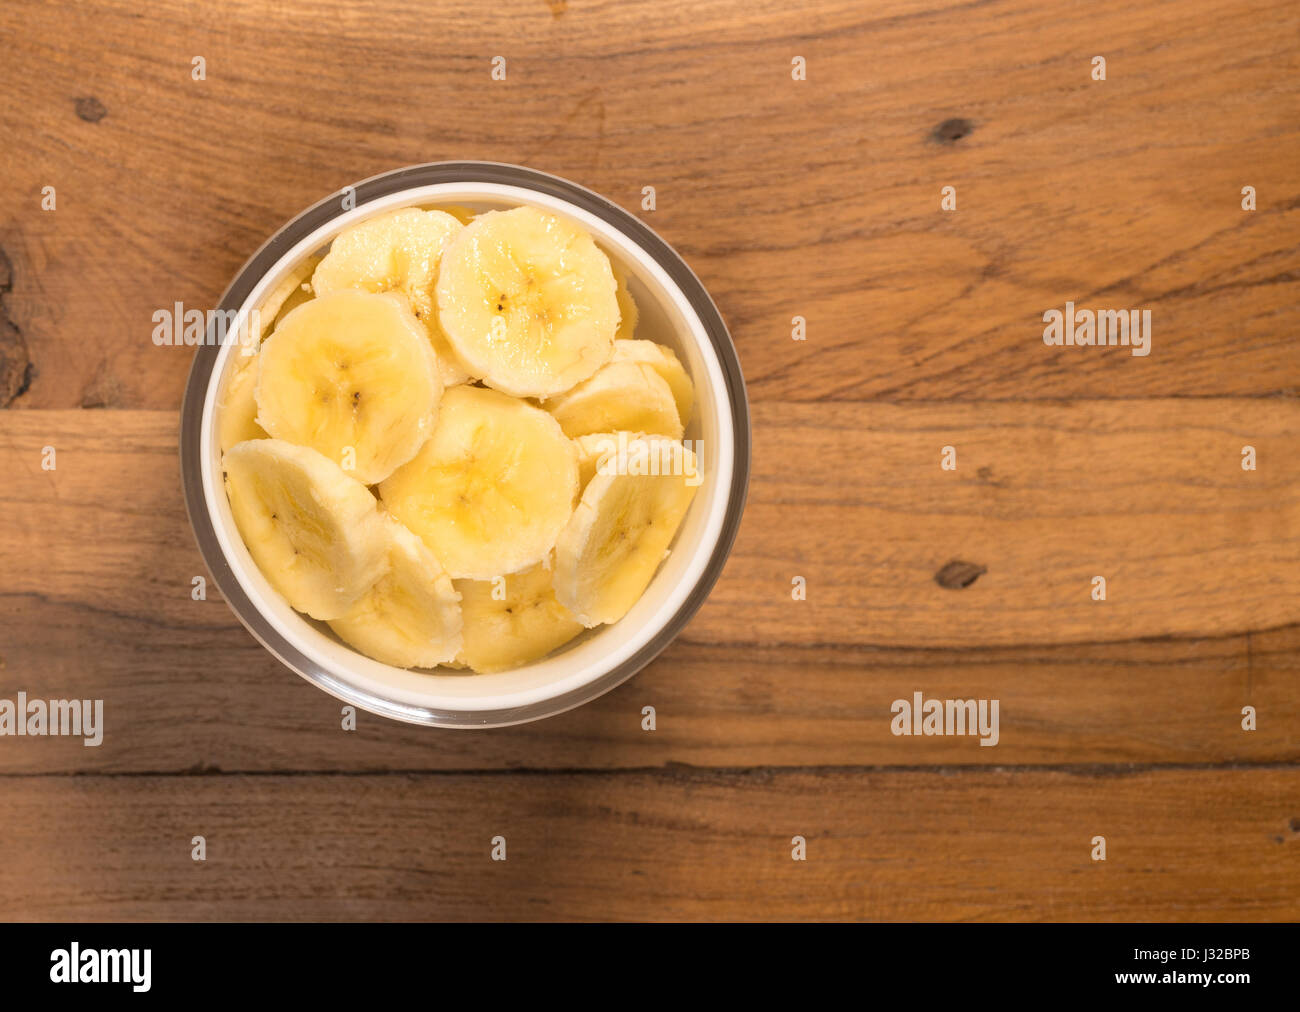 Banana slices freshly washed and sitting on old wood table surface Stock Photo